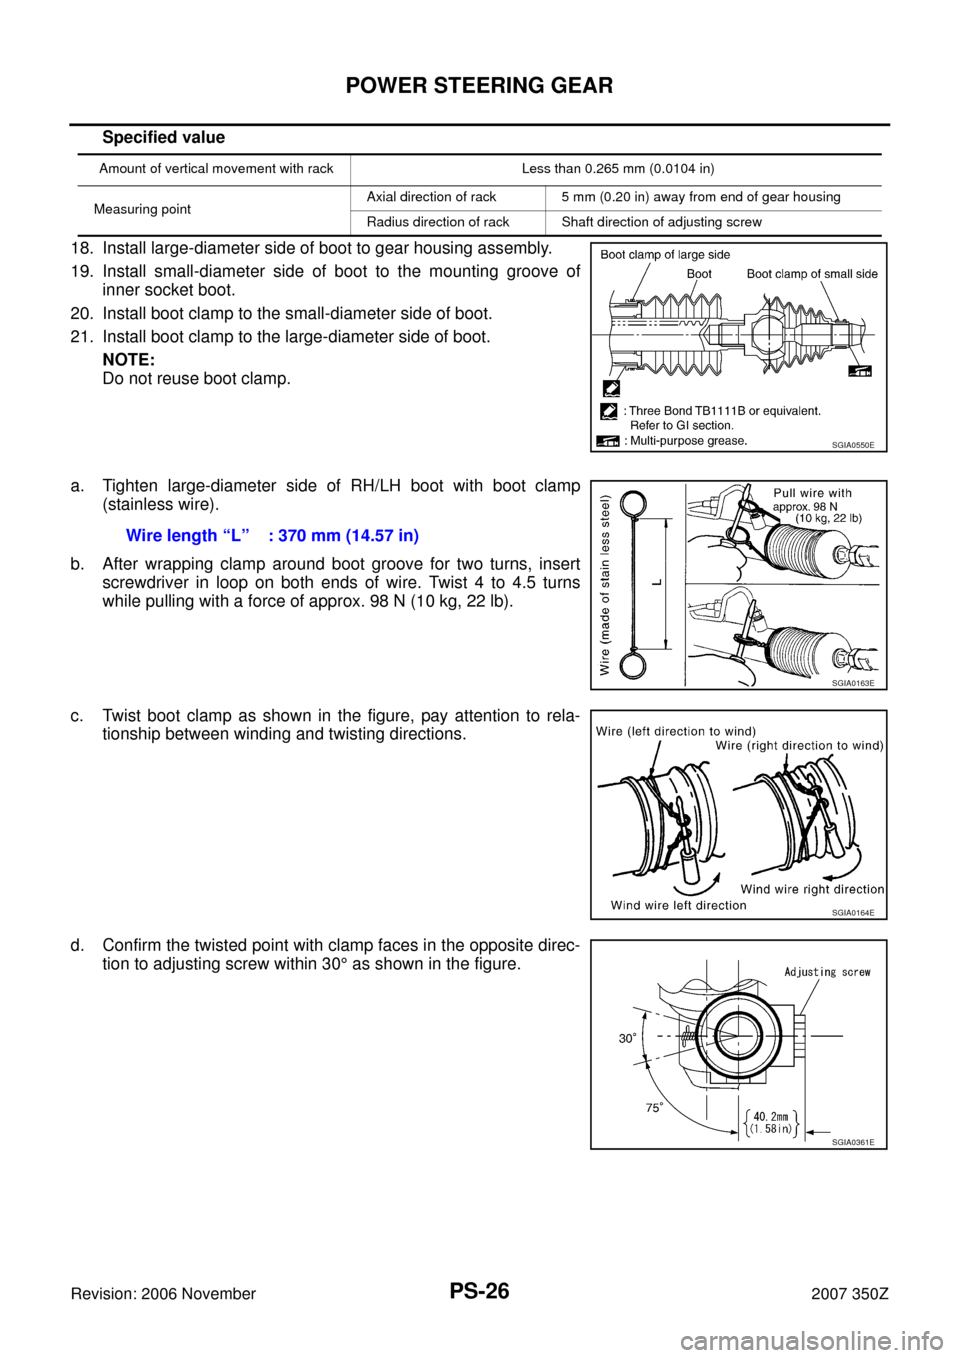 NISSAN 350Z 2007 Z33 Power Steering System Workshop Manual PS-26
POWER STEERING GEAR
Revision: 2006 November2007 350Z
Specified value
18. Install large-diameter side of boot to gear housing assembly.
19. Install small-diameter side of boot to the mounting gro